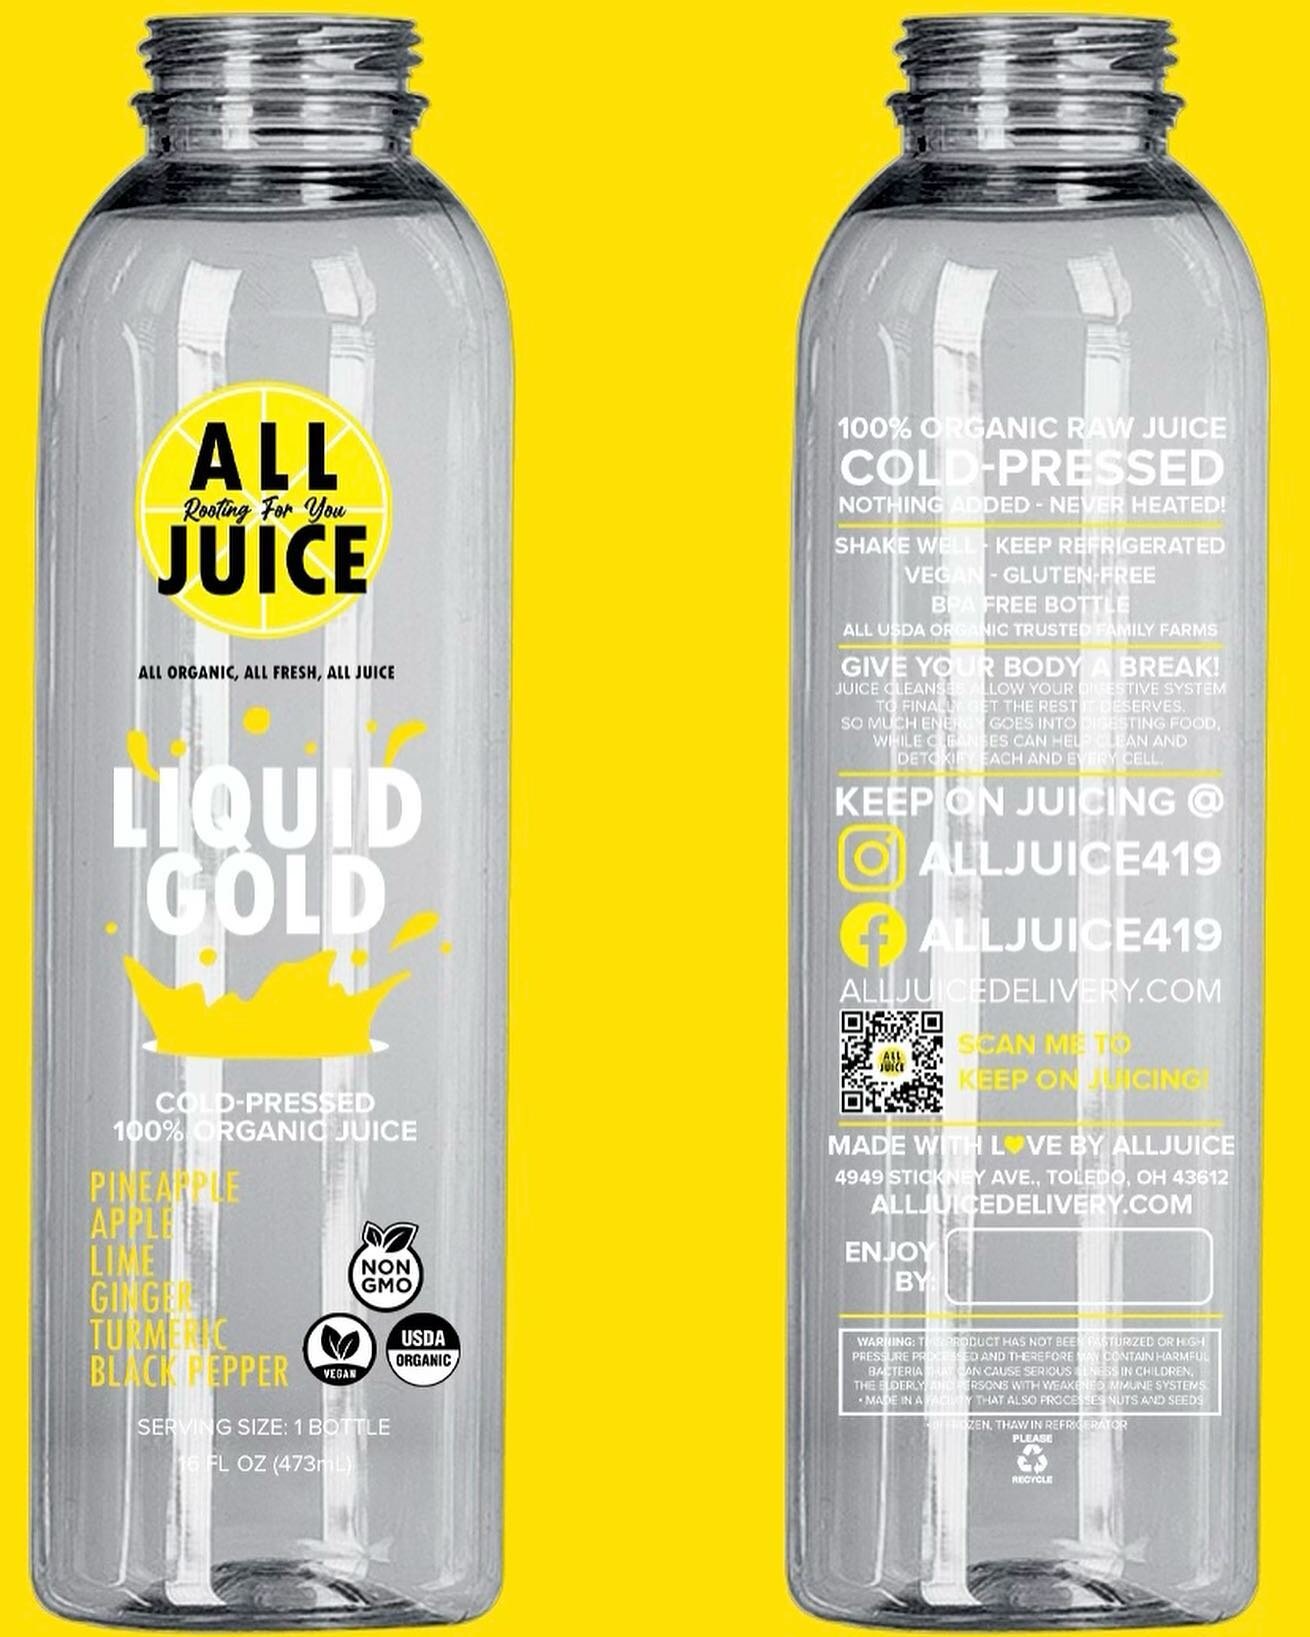 New labels 👀 👉🏻

ALL JUICE 🧃 ALL ORGANIC 🍋 ALL DELIVERIES 🚚&hellip;..COMING VERY SOON!